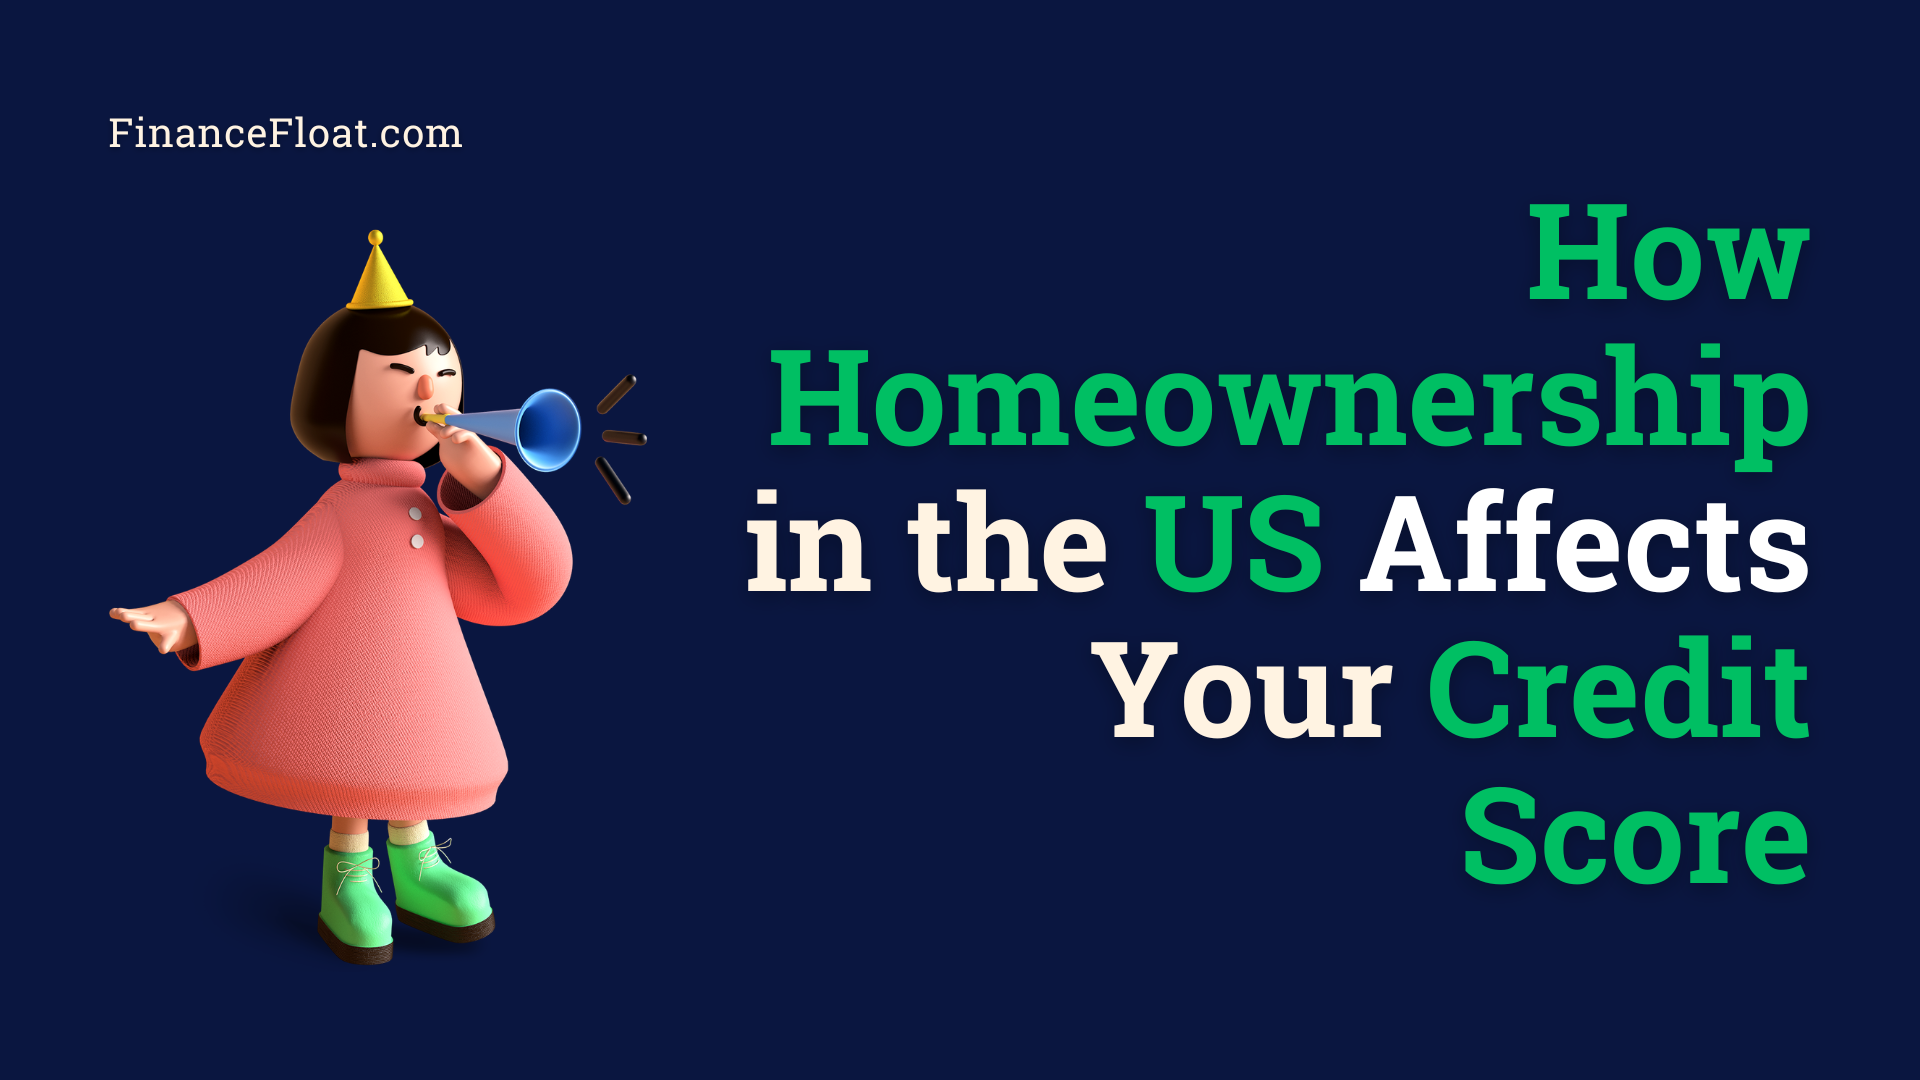 How Homeownership in the US Affects Your Credit Score